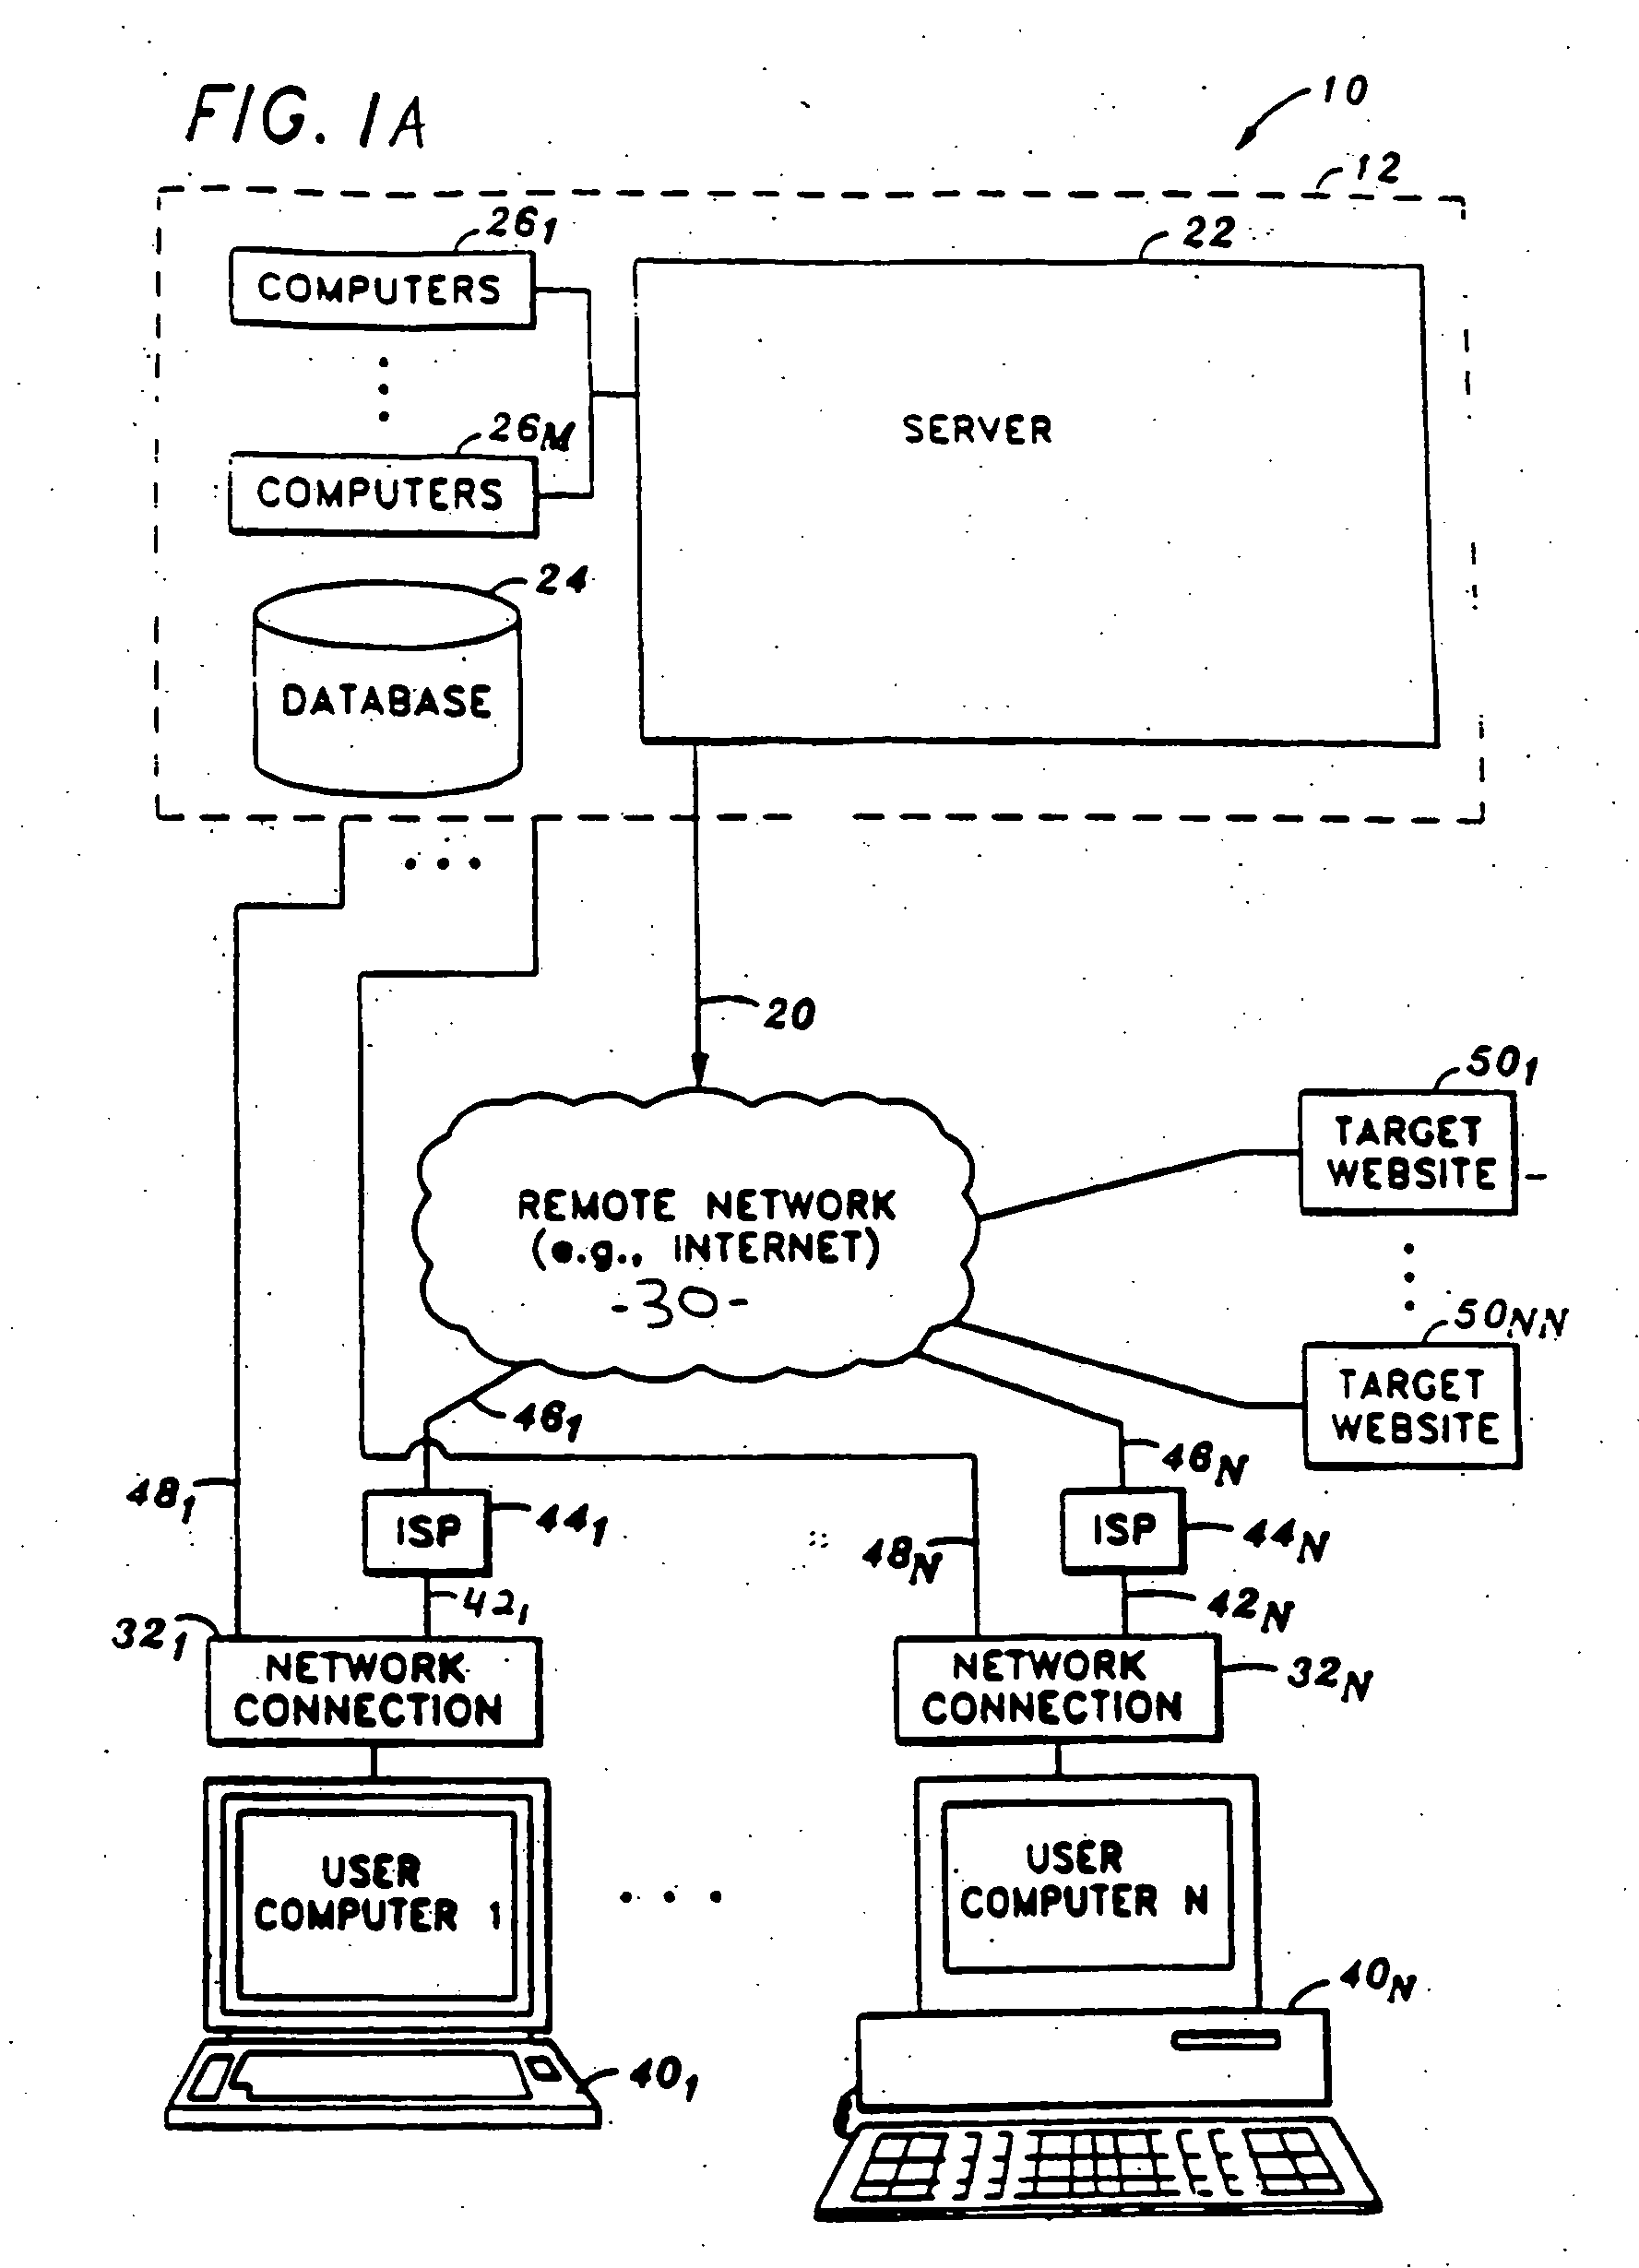 System and method for providing identification and search information